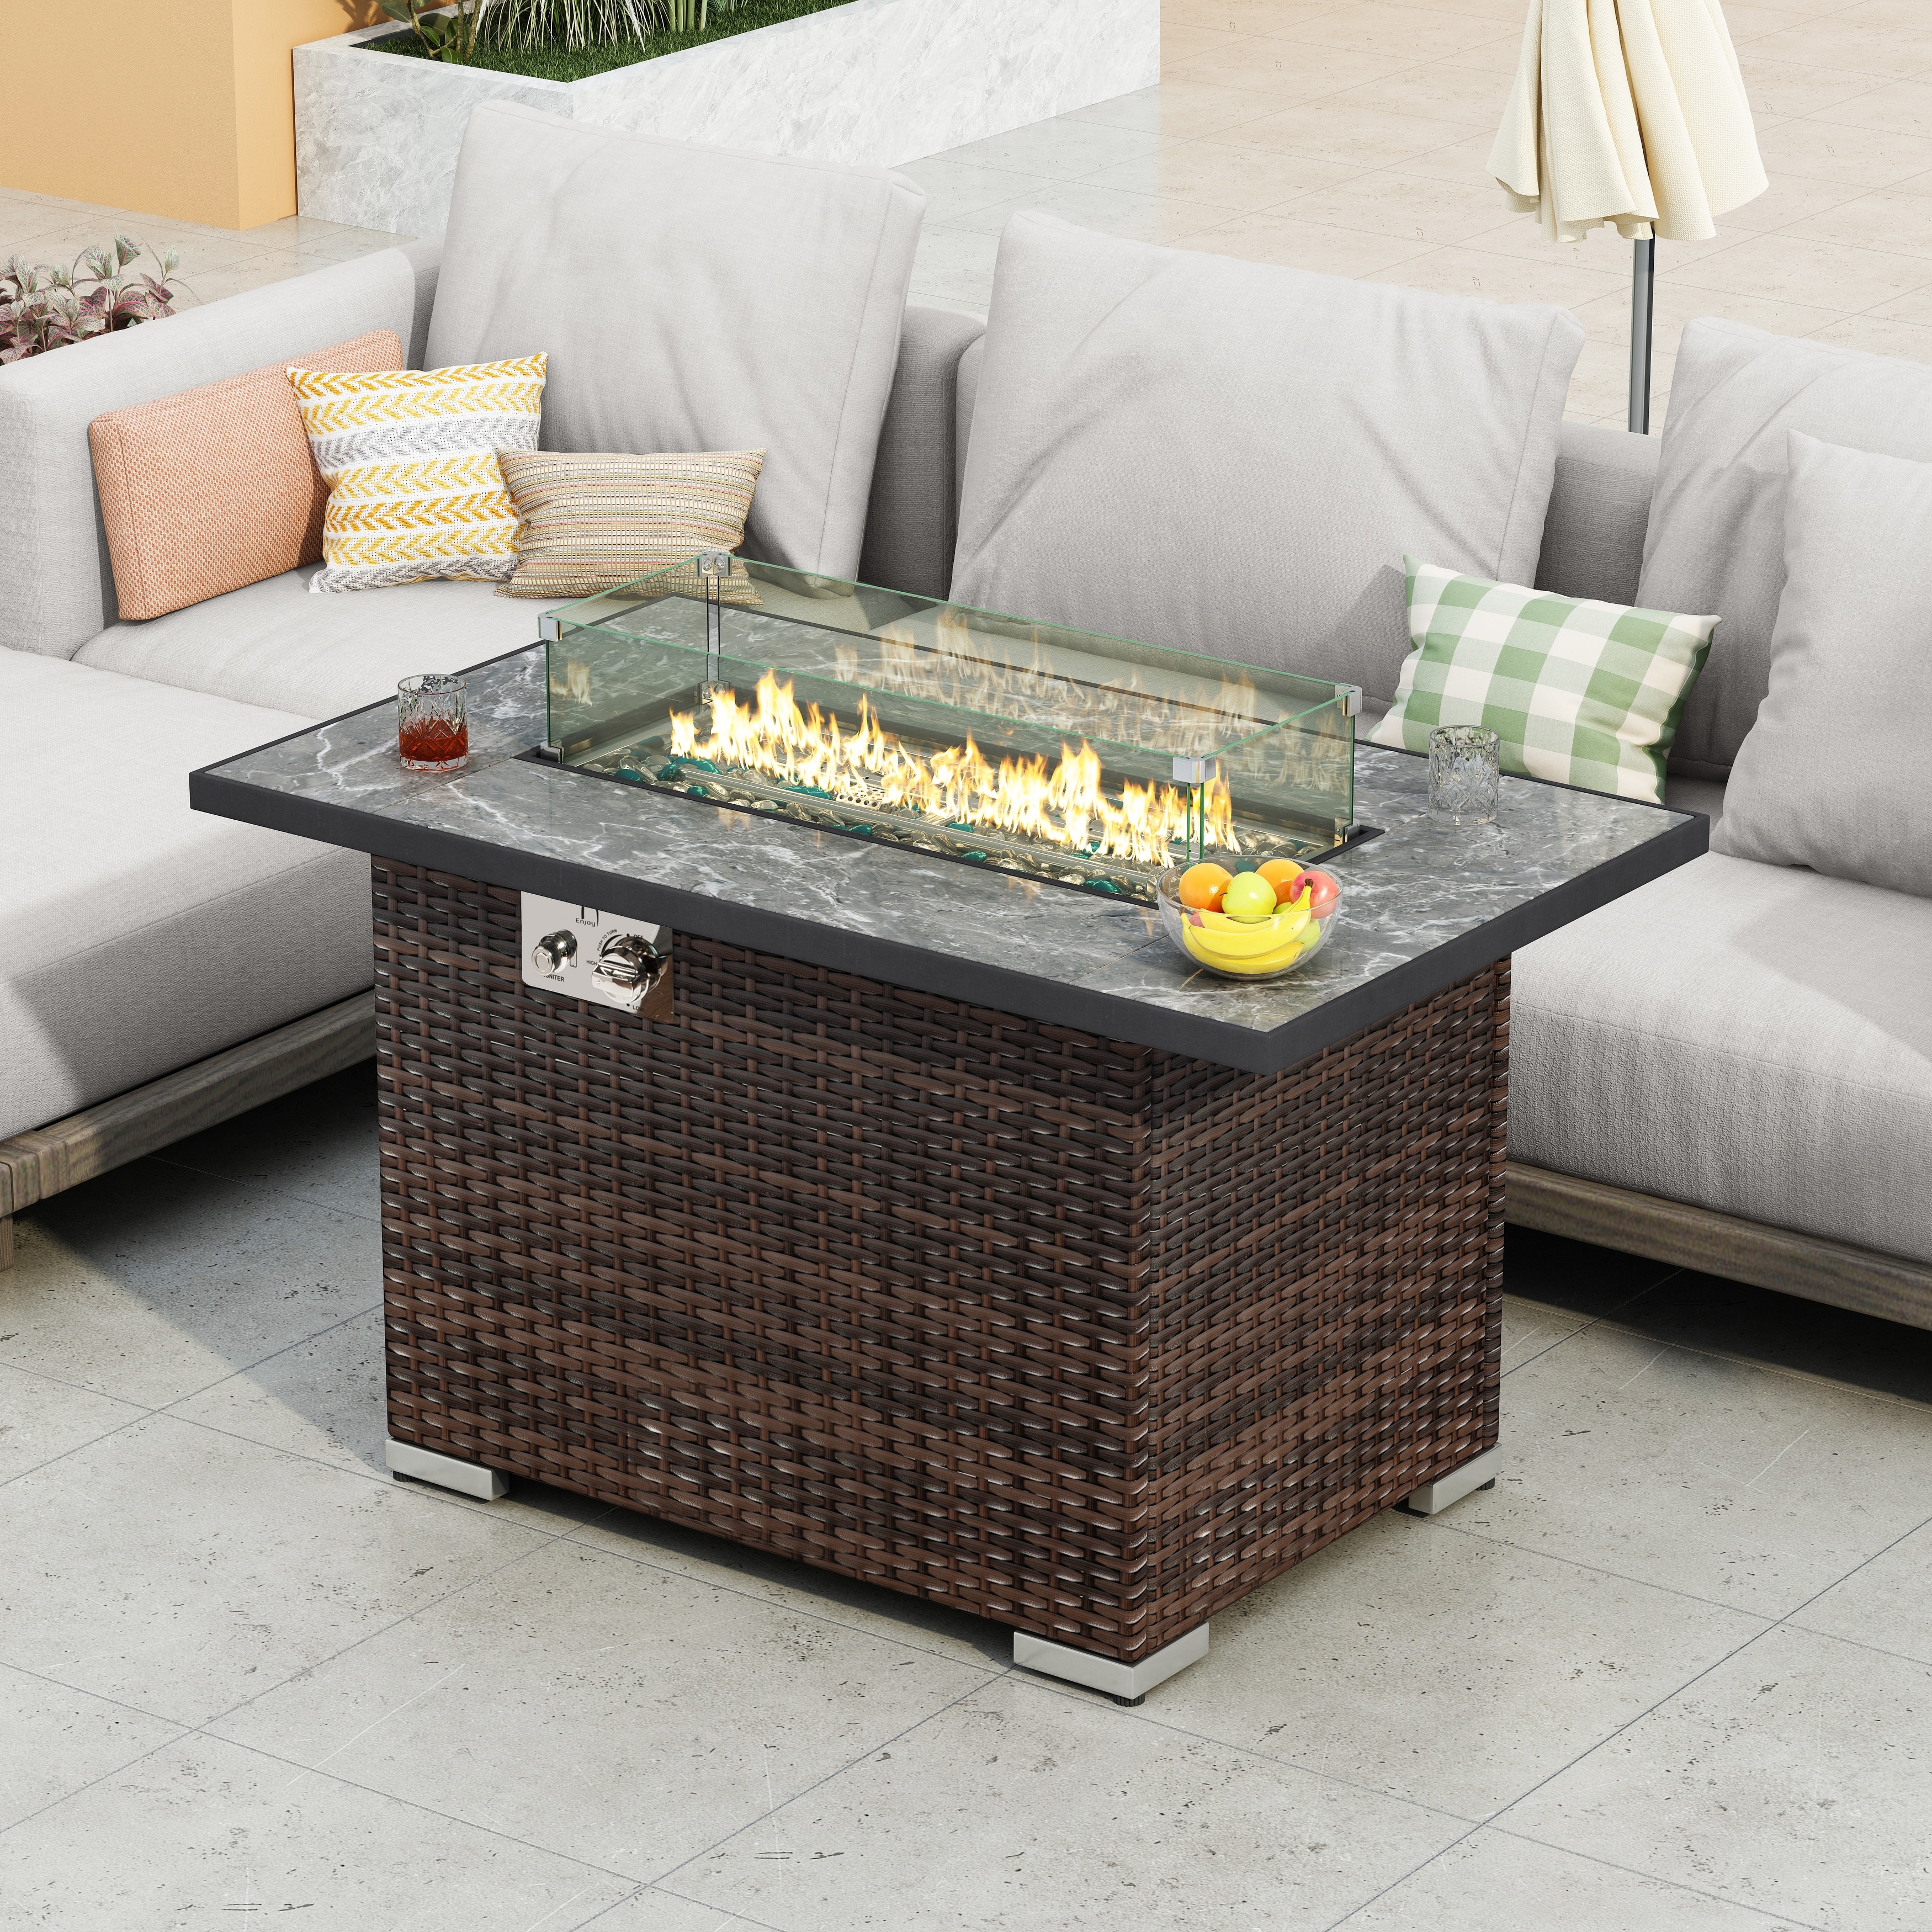 44inch Outdoor Fire Pit Table with Ceramic Tabletop